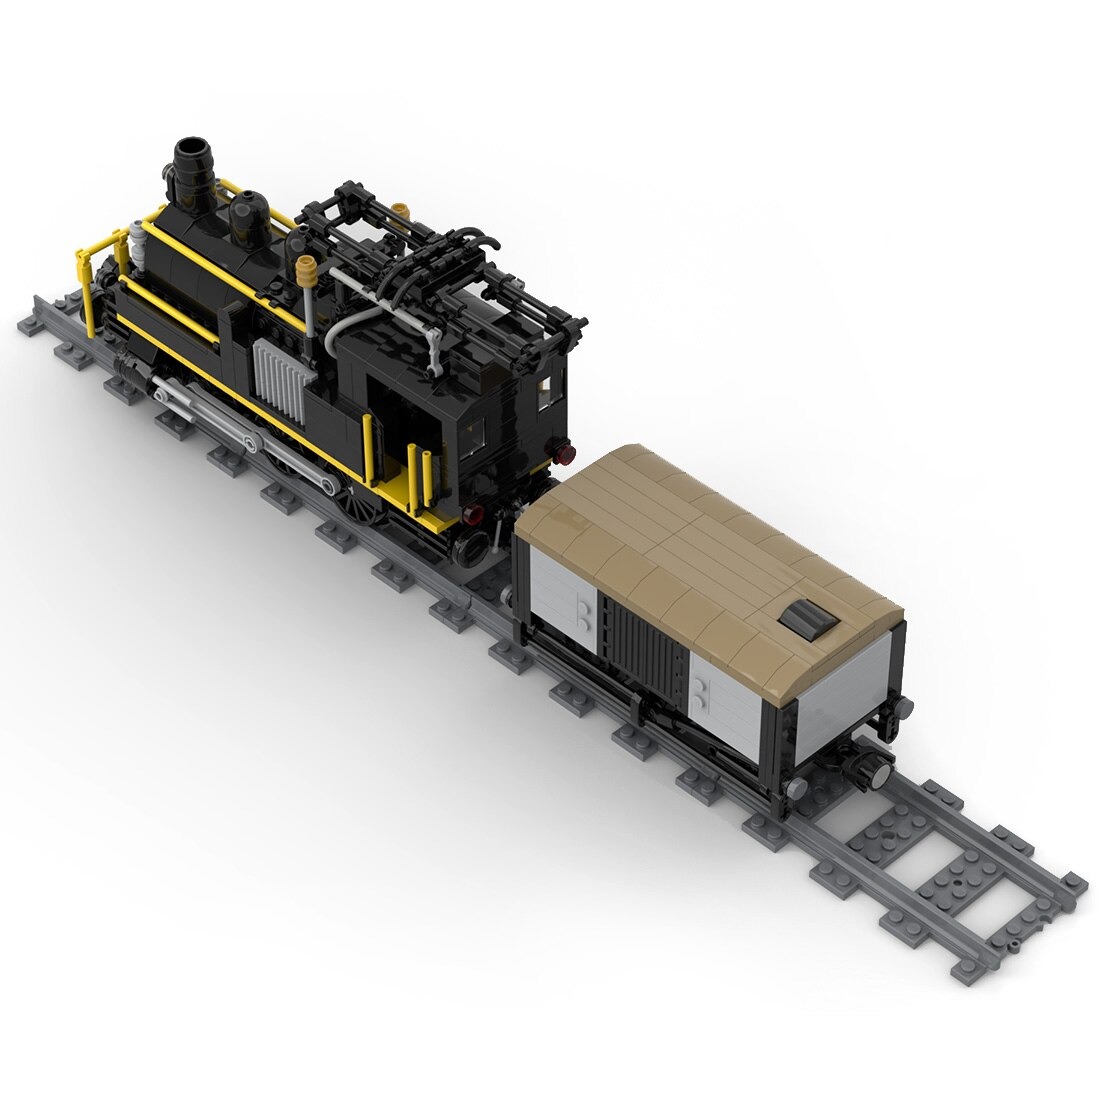 MOC-58561 Swiss Electrified Steam Locomotive With 792 Pieces